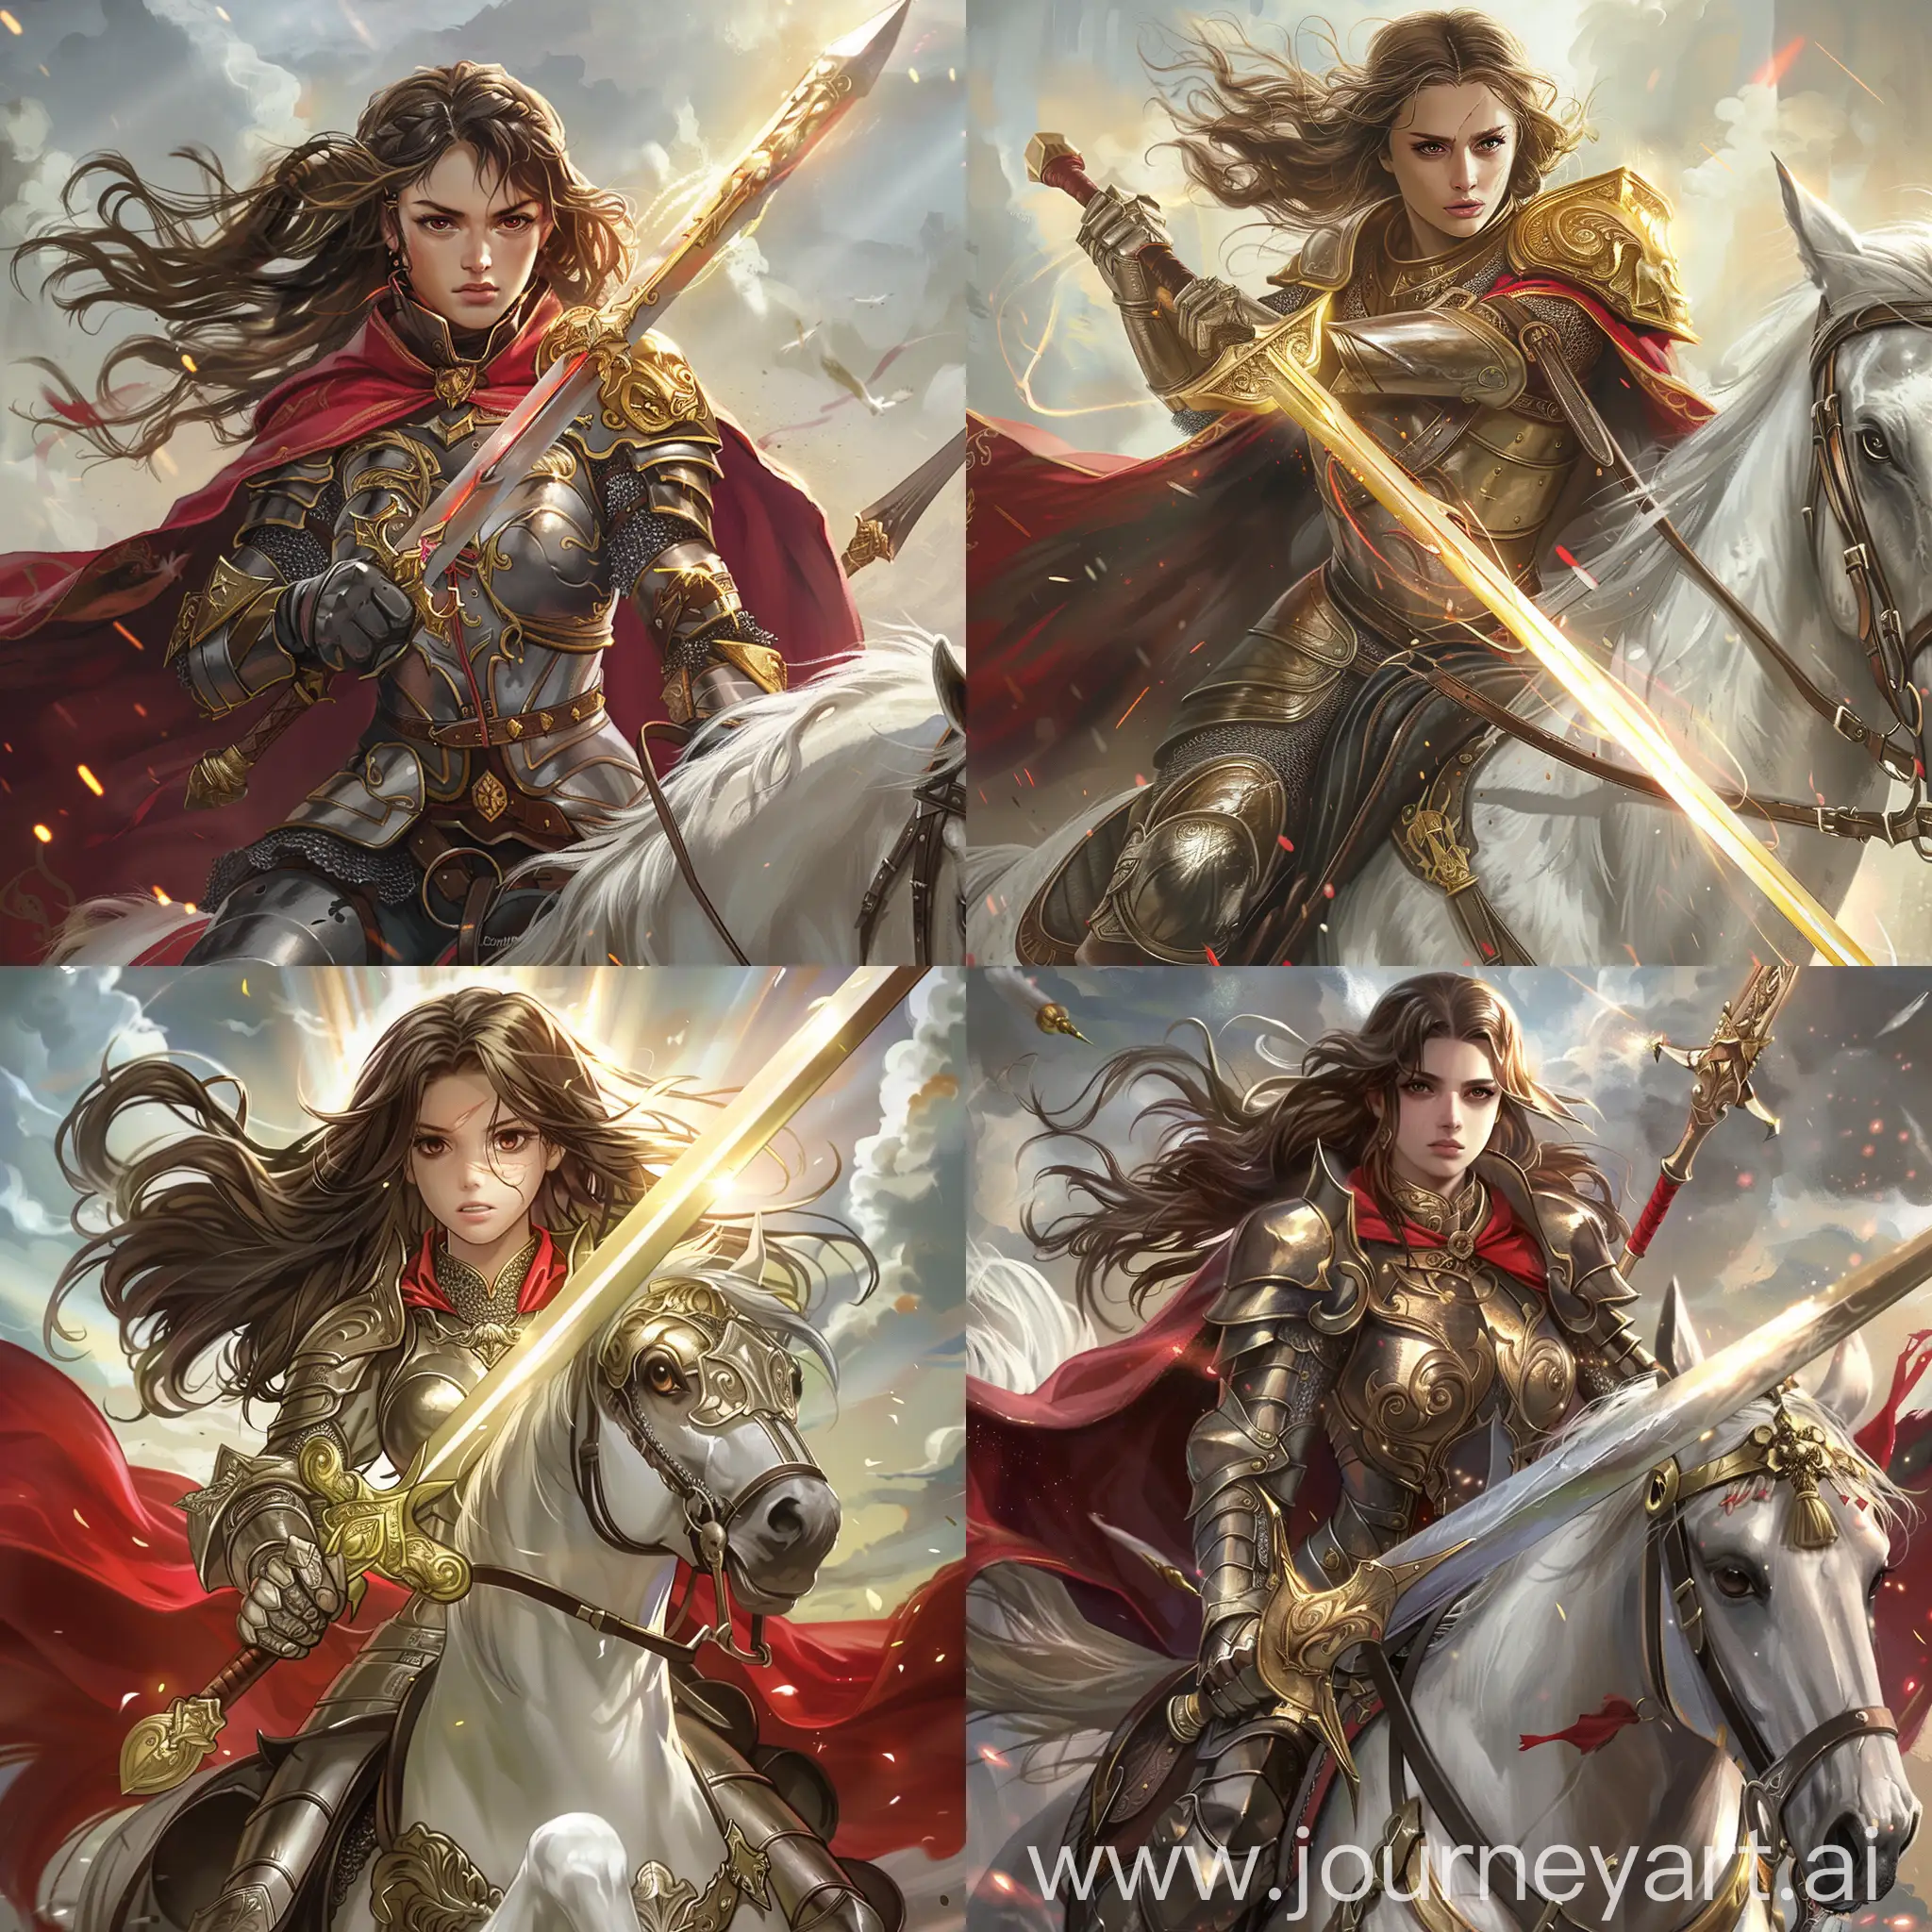 A girl of European appearance with long brown hair, brown eyes that look cold, in armor with a red cloak, riding a white horse, holding a two-handed golden sword that shines